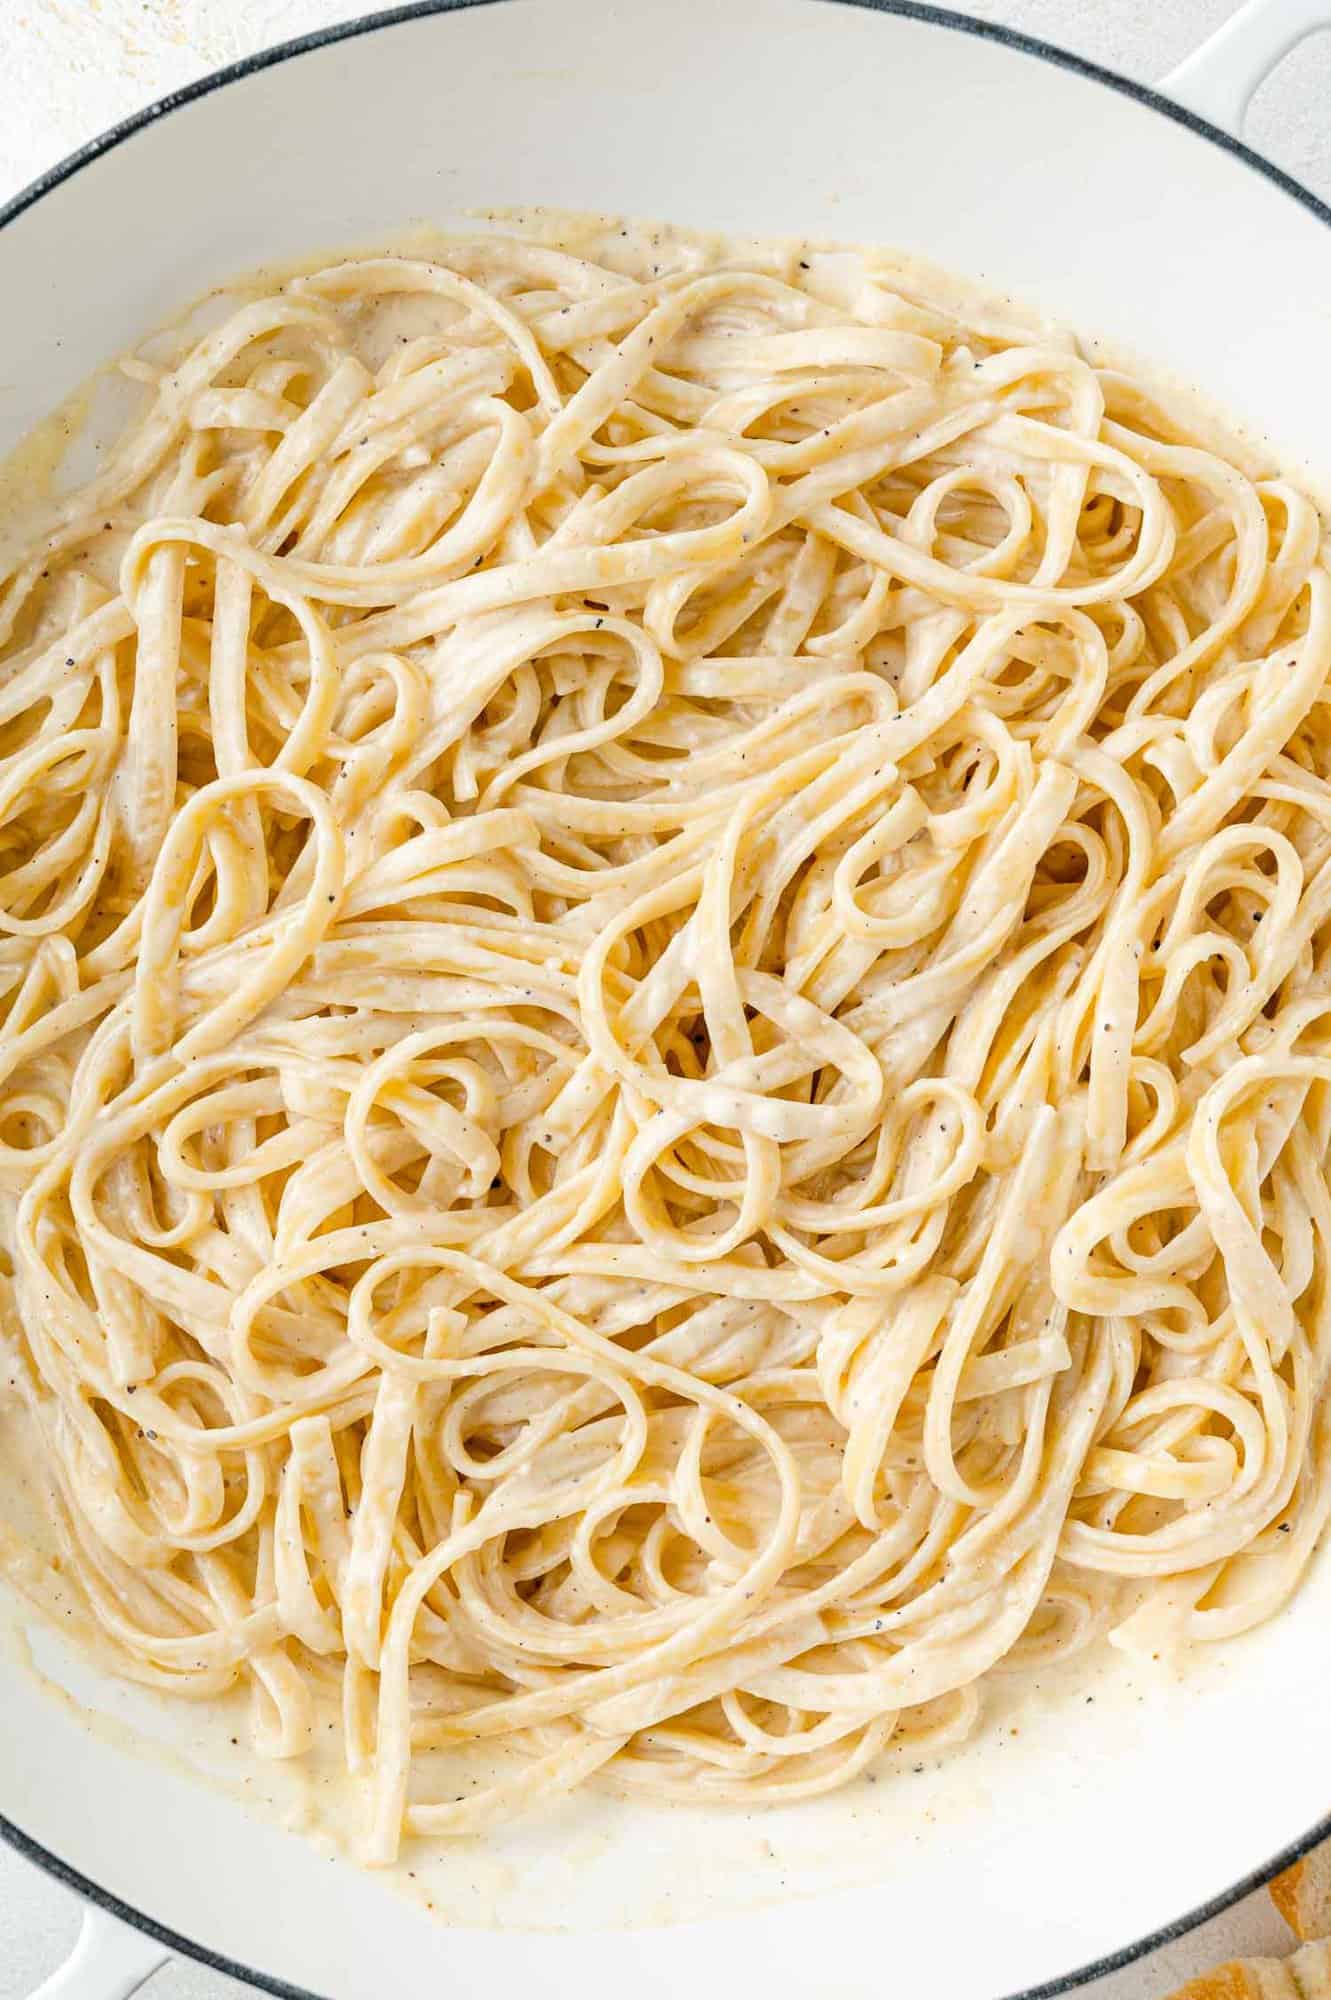 Alfredo sauce tossed with cooked fettuccini.